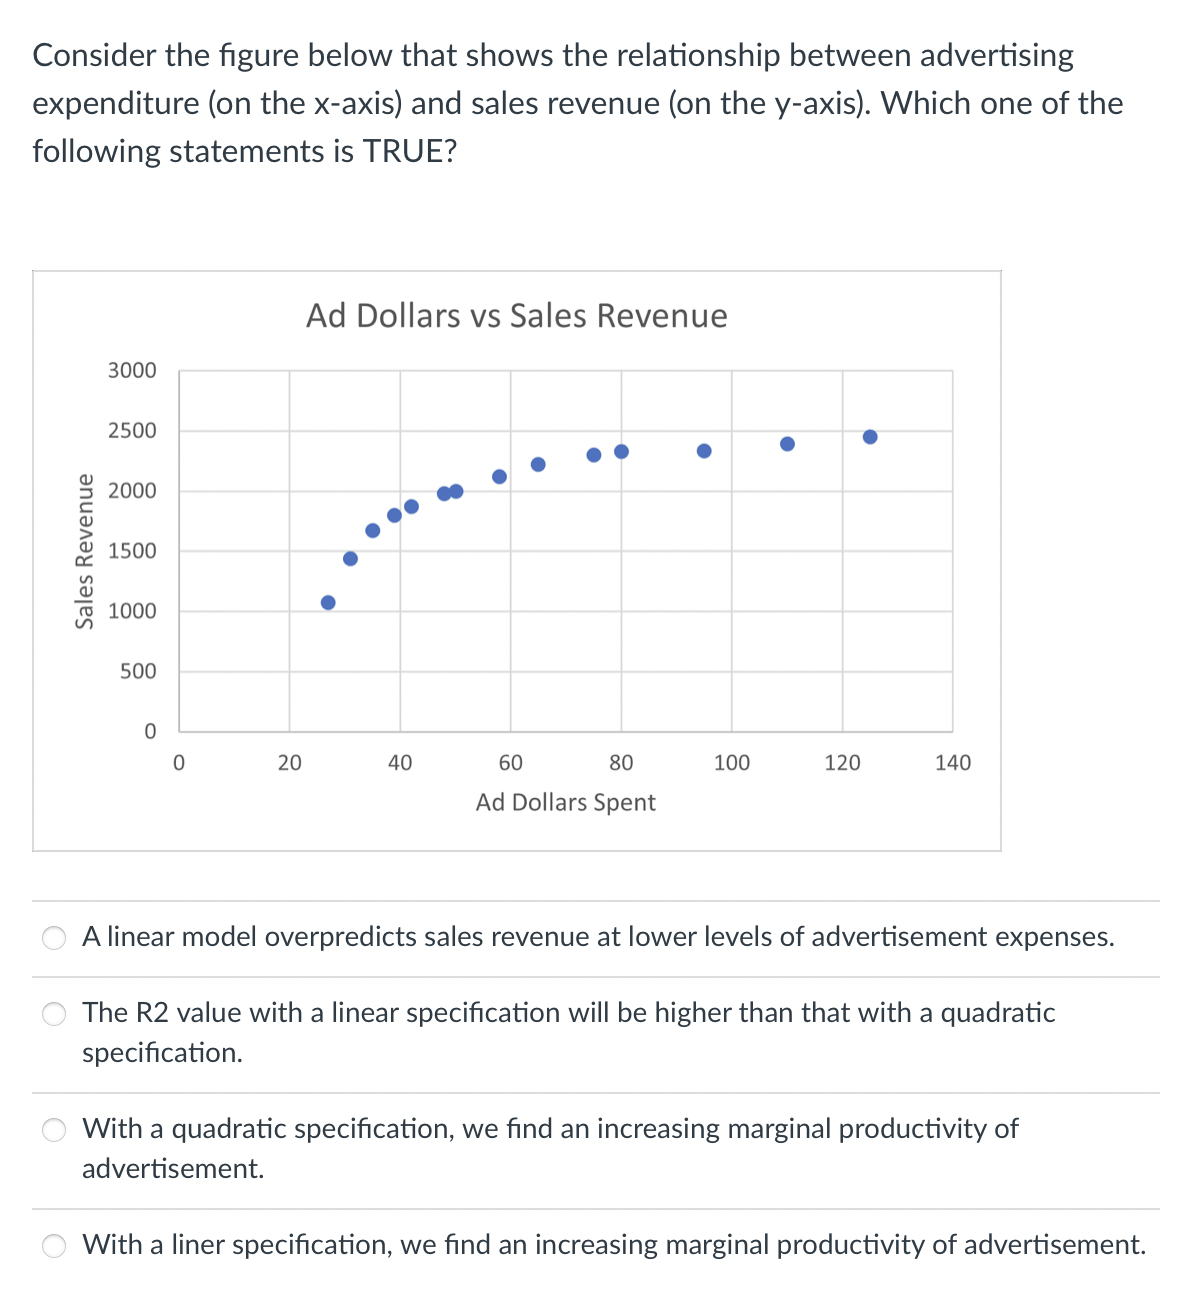 Consider the figure below that shows the relationship between advertising
expenditure (on the x-axis) and sales revenue (on the y-axis). Which one of the
following statements is TRUE?
Sales Revenue
3000
2500
2000
1500
1000
500
0
0
20
Ad Dollars vs Sales Revenue
40
60
80
Ad Dollars Spent
100
120
●
140
A linear model overpredicts sales revenue at lower levels of advertisement expenses.
The R2 value with a linear specification will be higher than that with a quadratic
specification.
With a quadratic specification, we find an increasing marginal productivity of
advertisement.
With a liner specification, we find an increasing marginal productivity of advertisement.